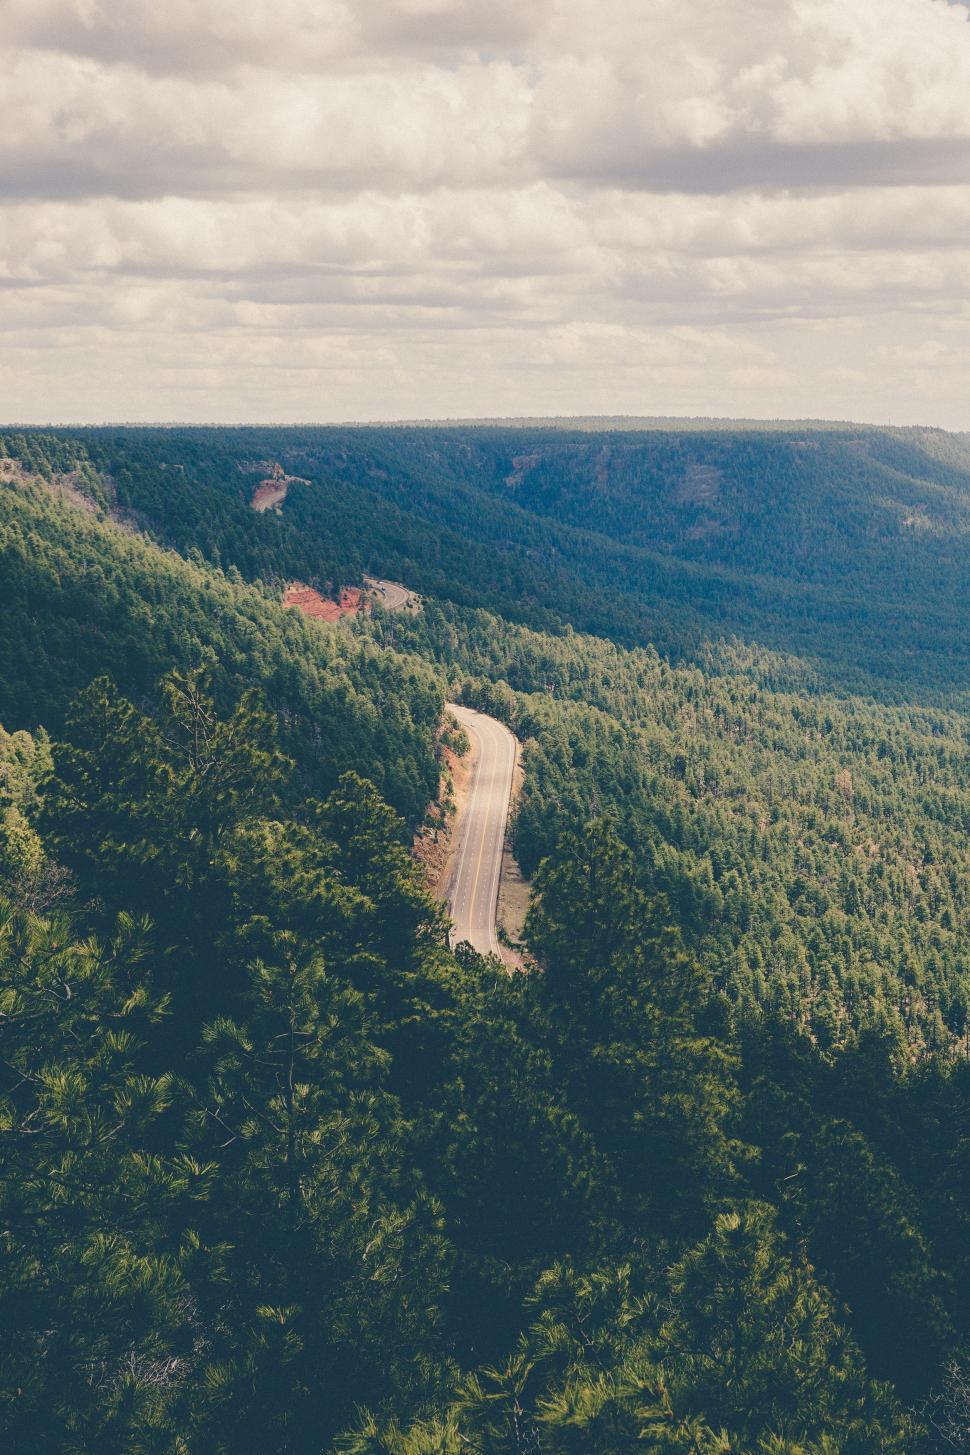 Free Image of Road Cutting Through Dense Forest 